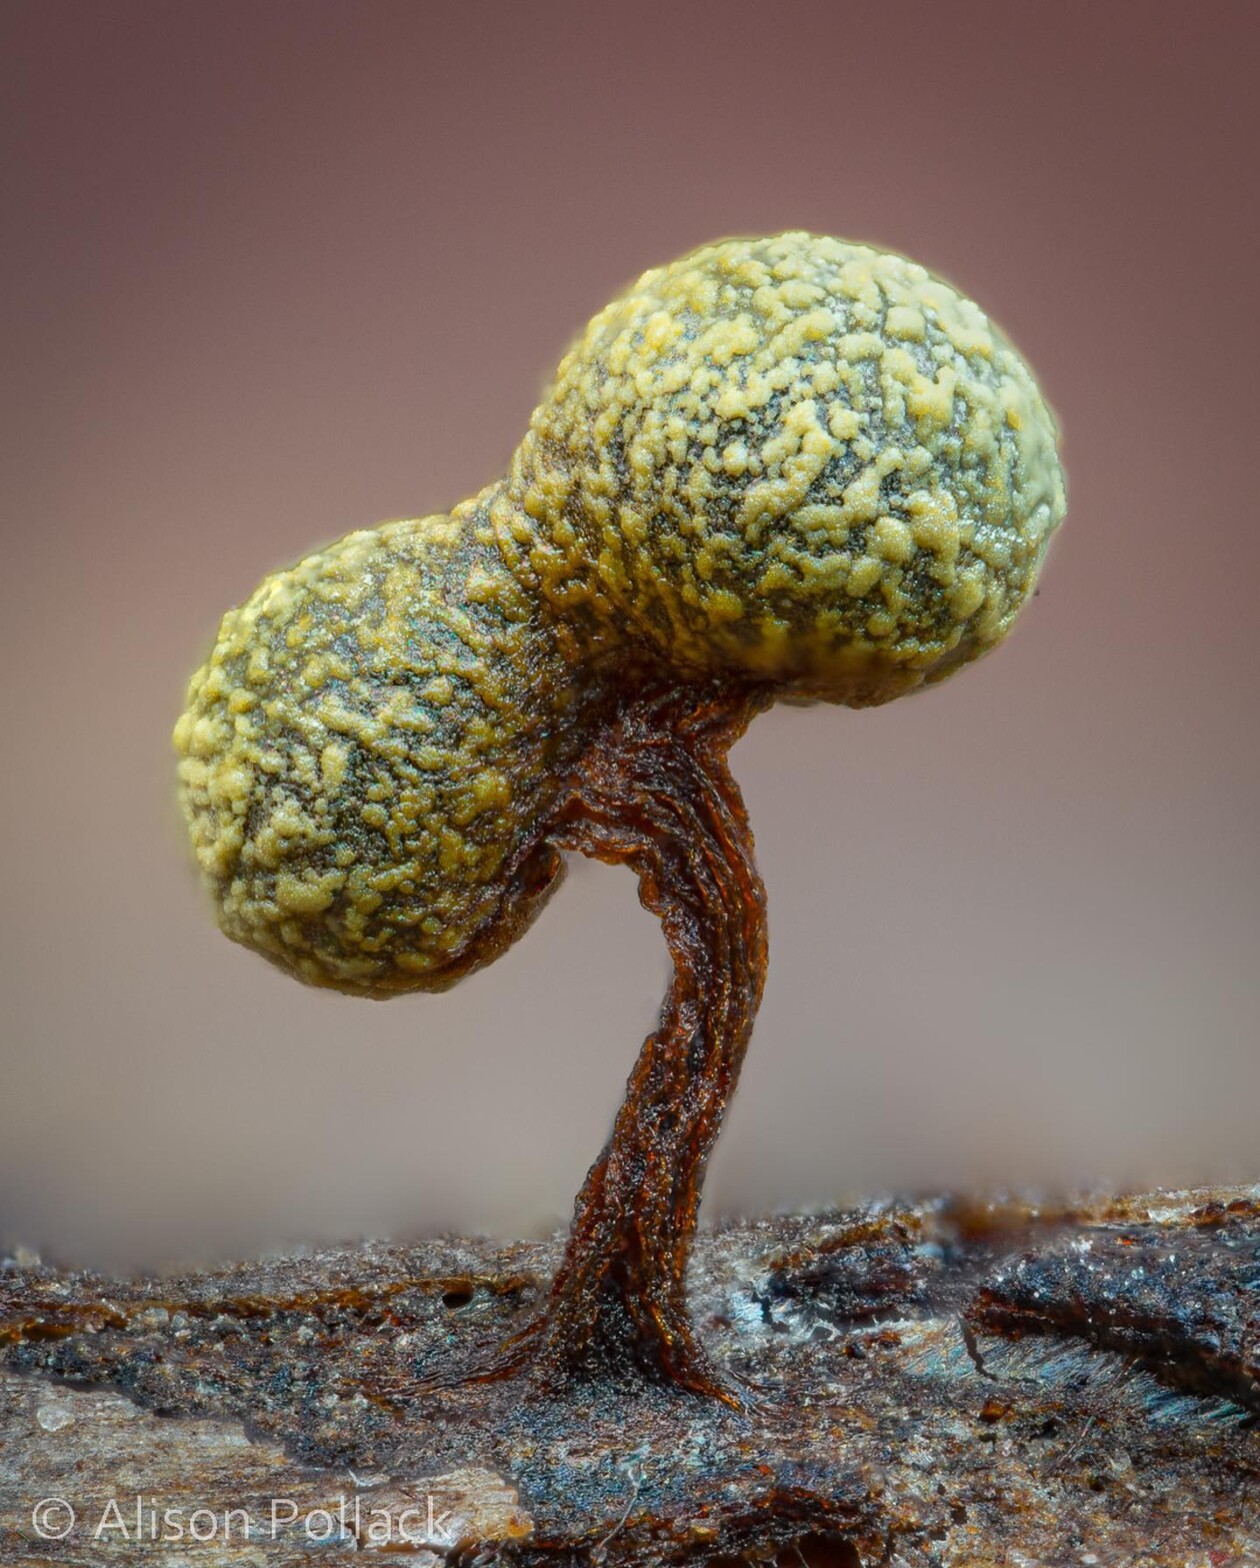 The Microscopic Majesty Of Mushrooms And Molds Captured By Alison Pollack (2)